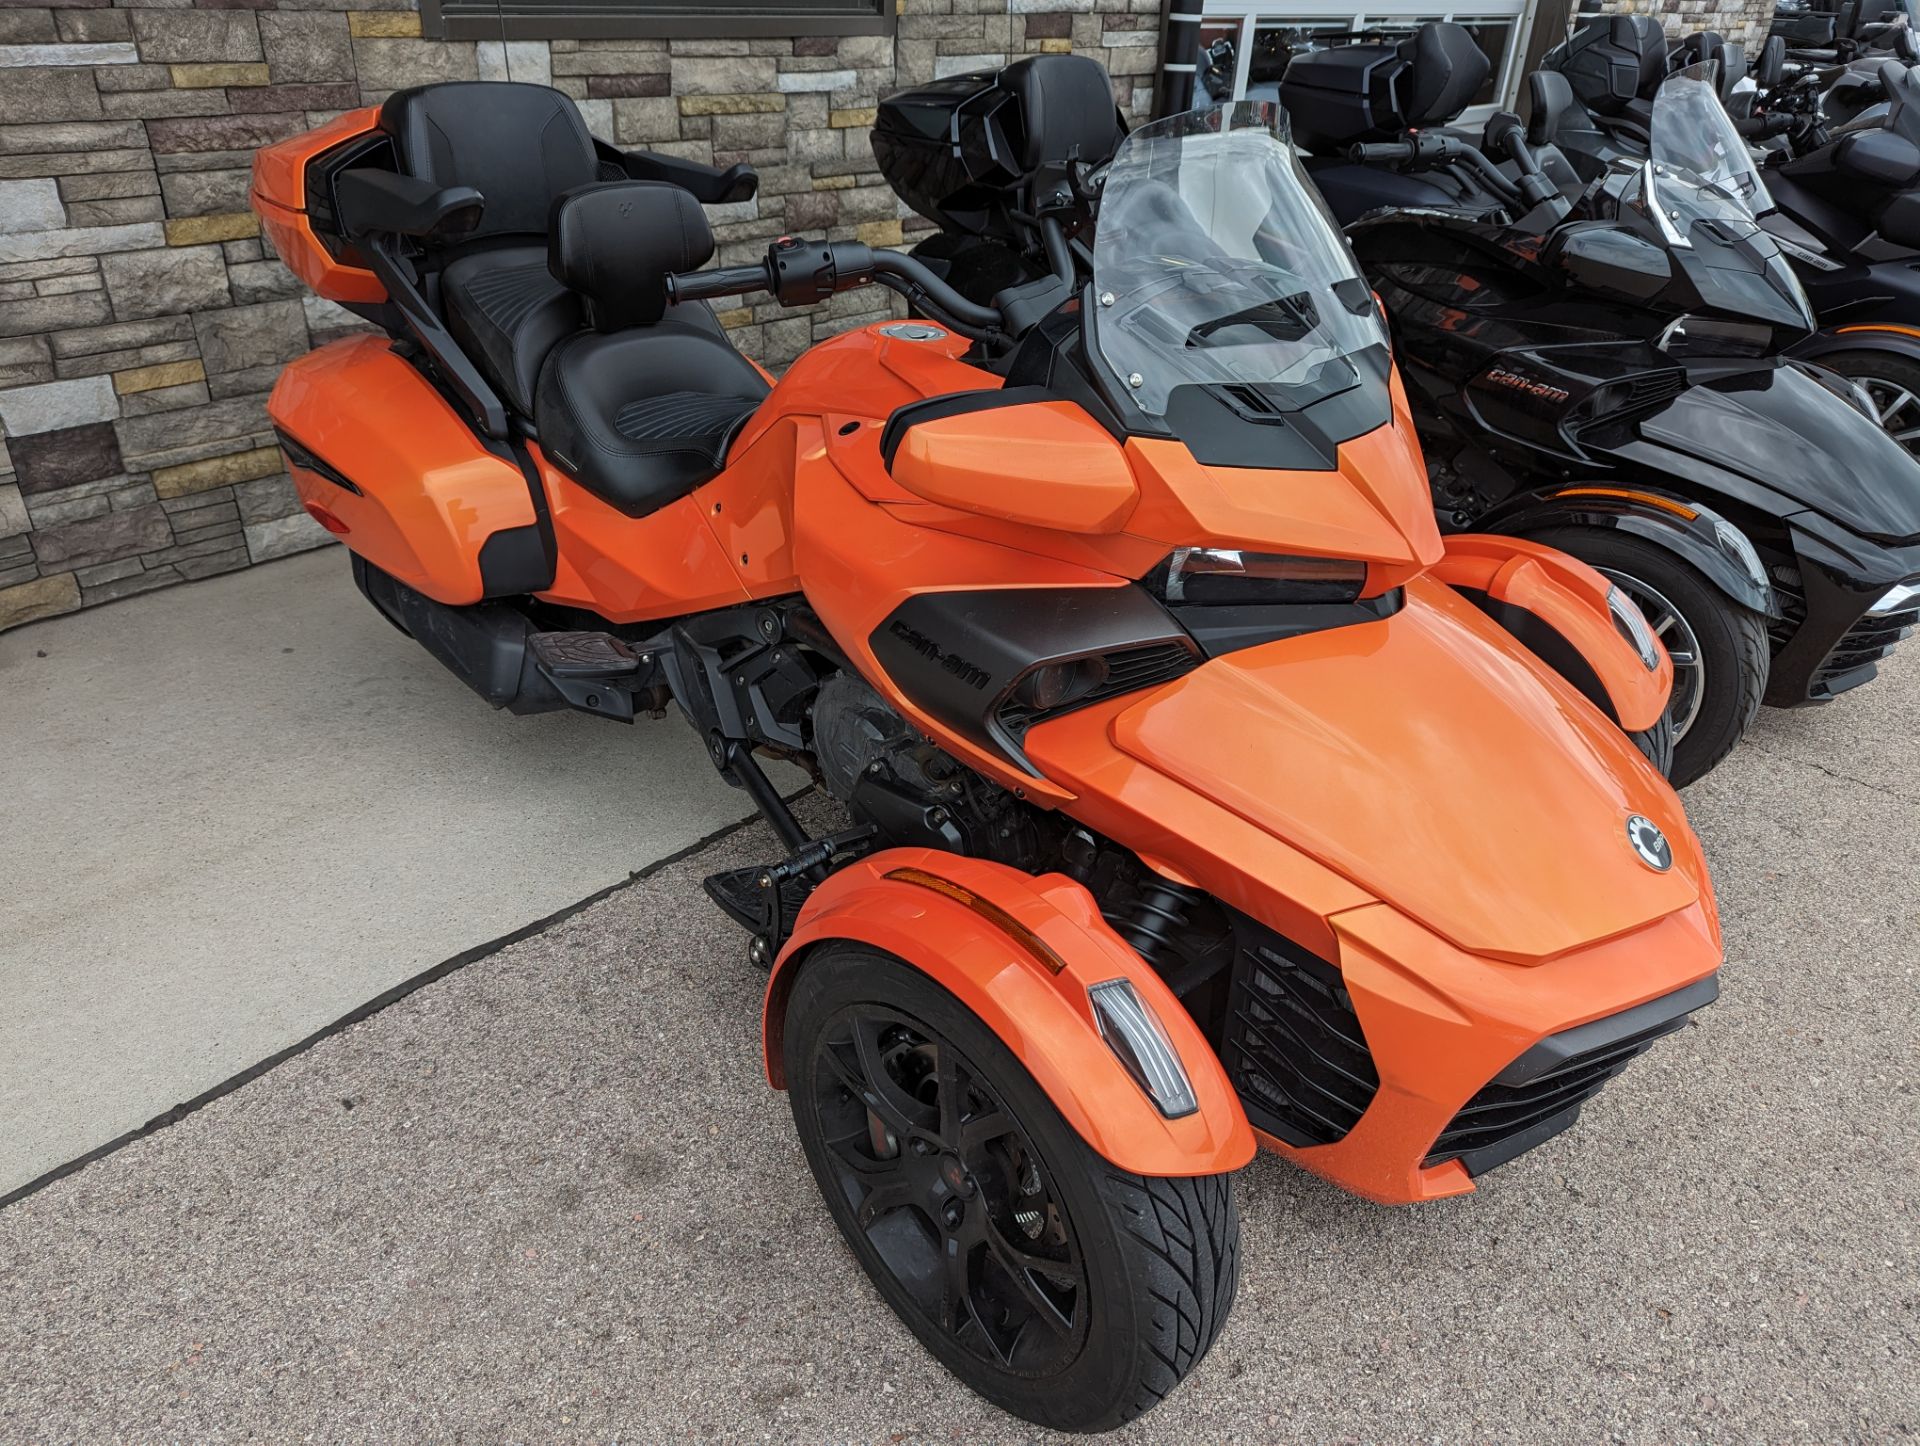 2019 Can-Am Spyder F3 Limited in Rapid City, South Dakota - Photo 1